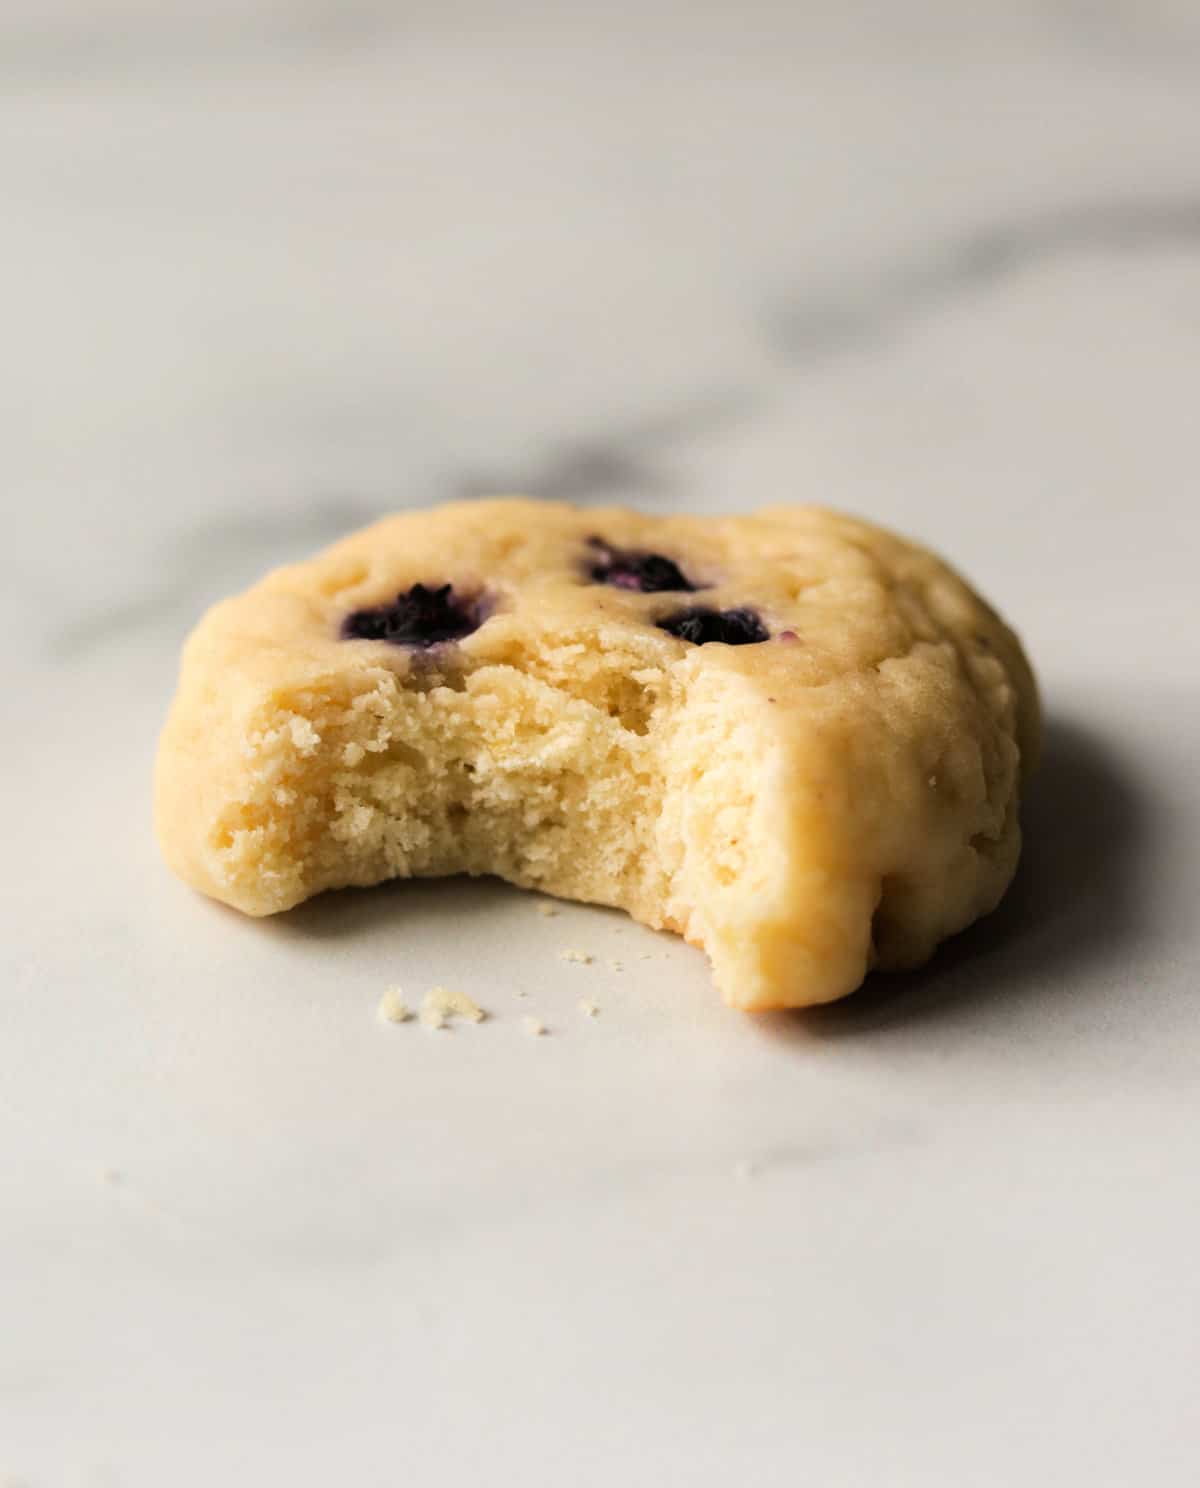 An angled shot of a lemon cookie with a bite taken out.